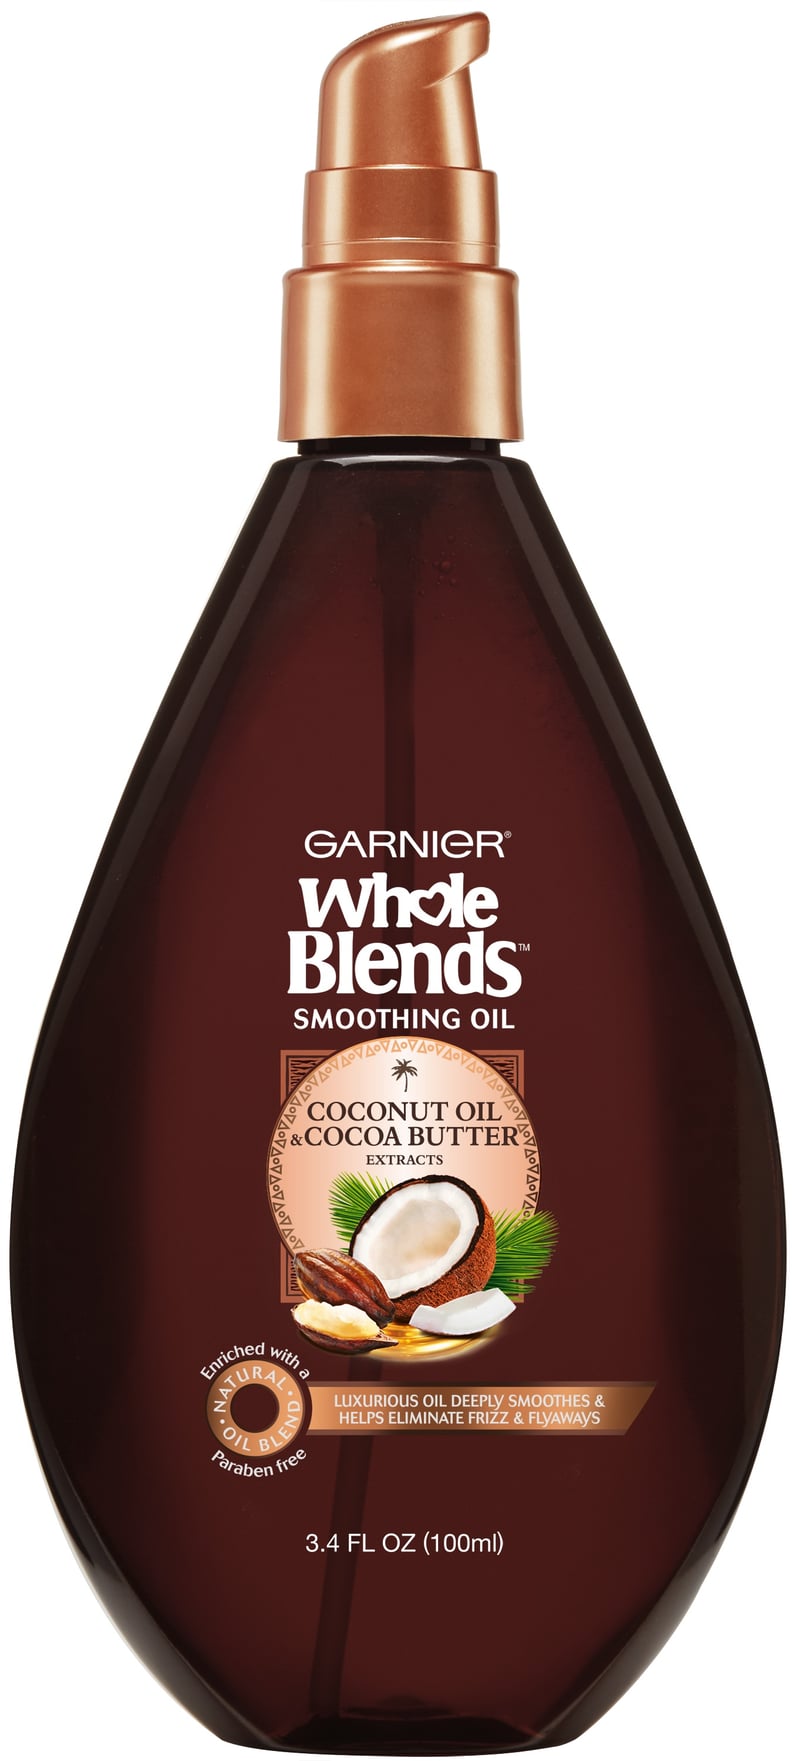 Garnier Whole Blends Smoothing Oil With Coconut Oil & Coco Butter Extract